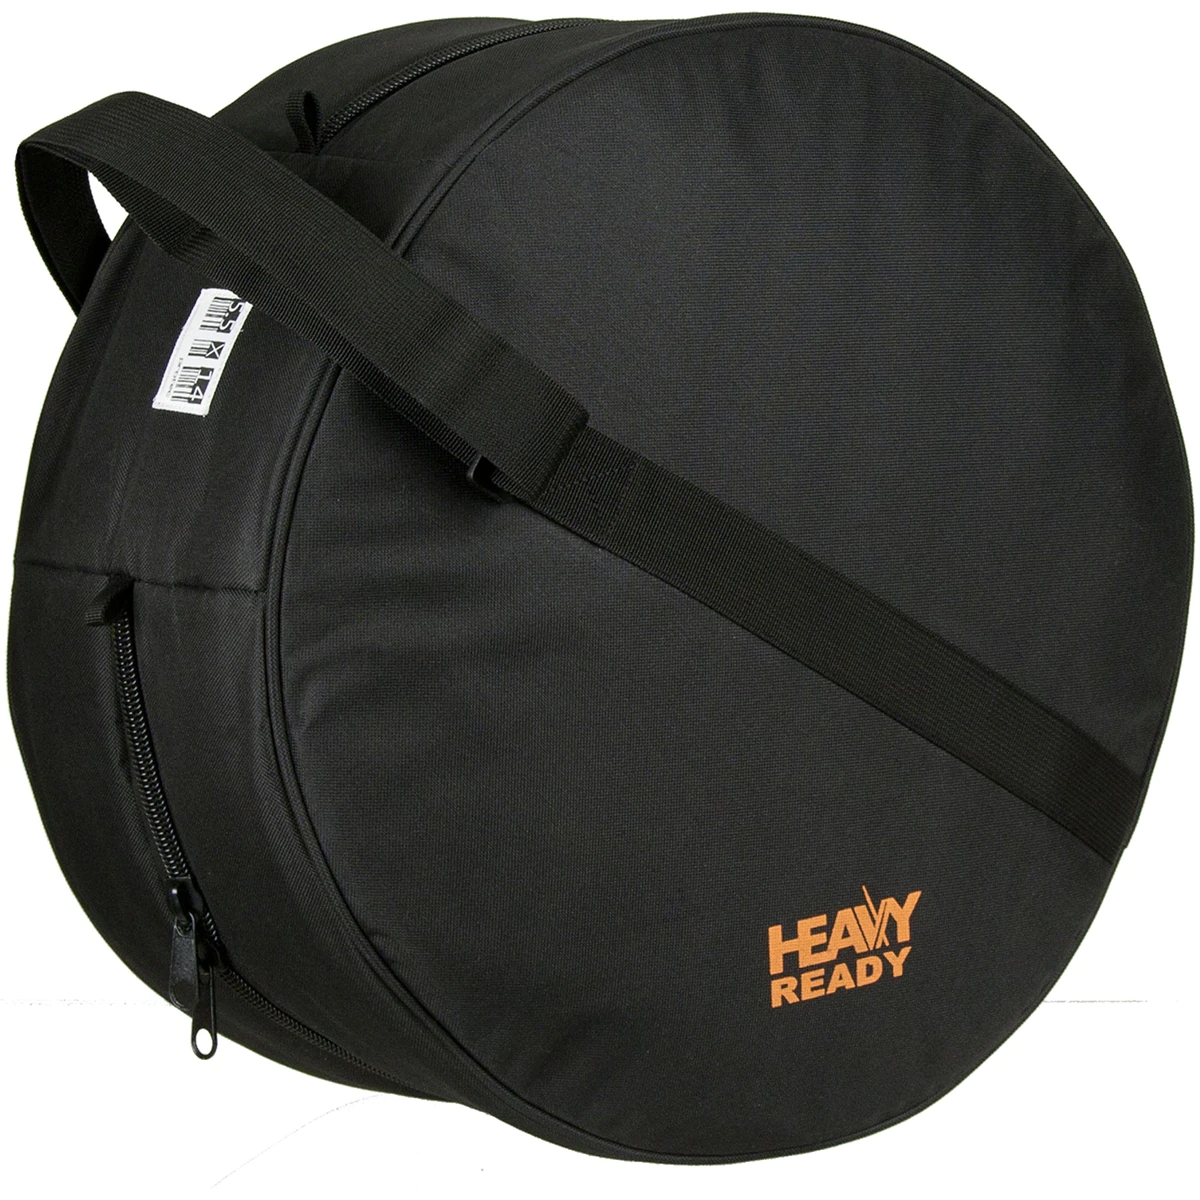 PROTEC Heavy Ready Padded  Snare Bag 14x5.5